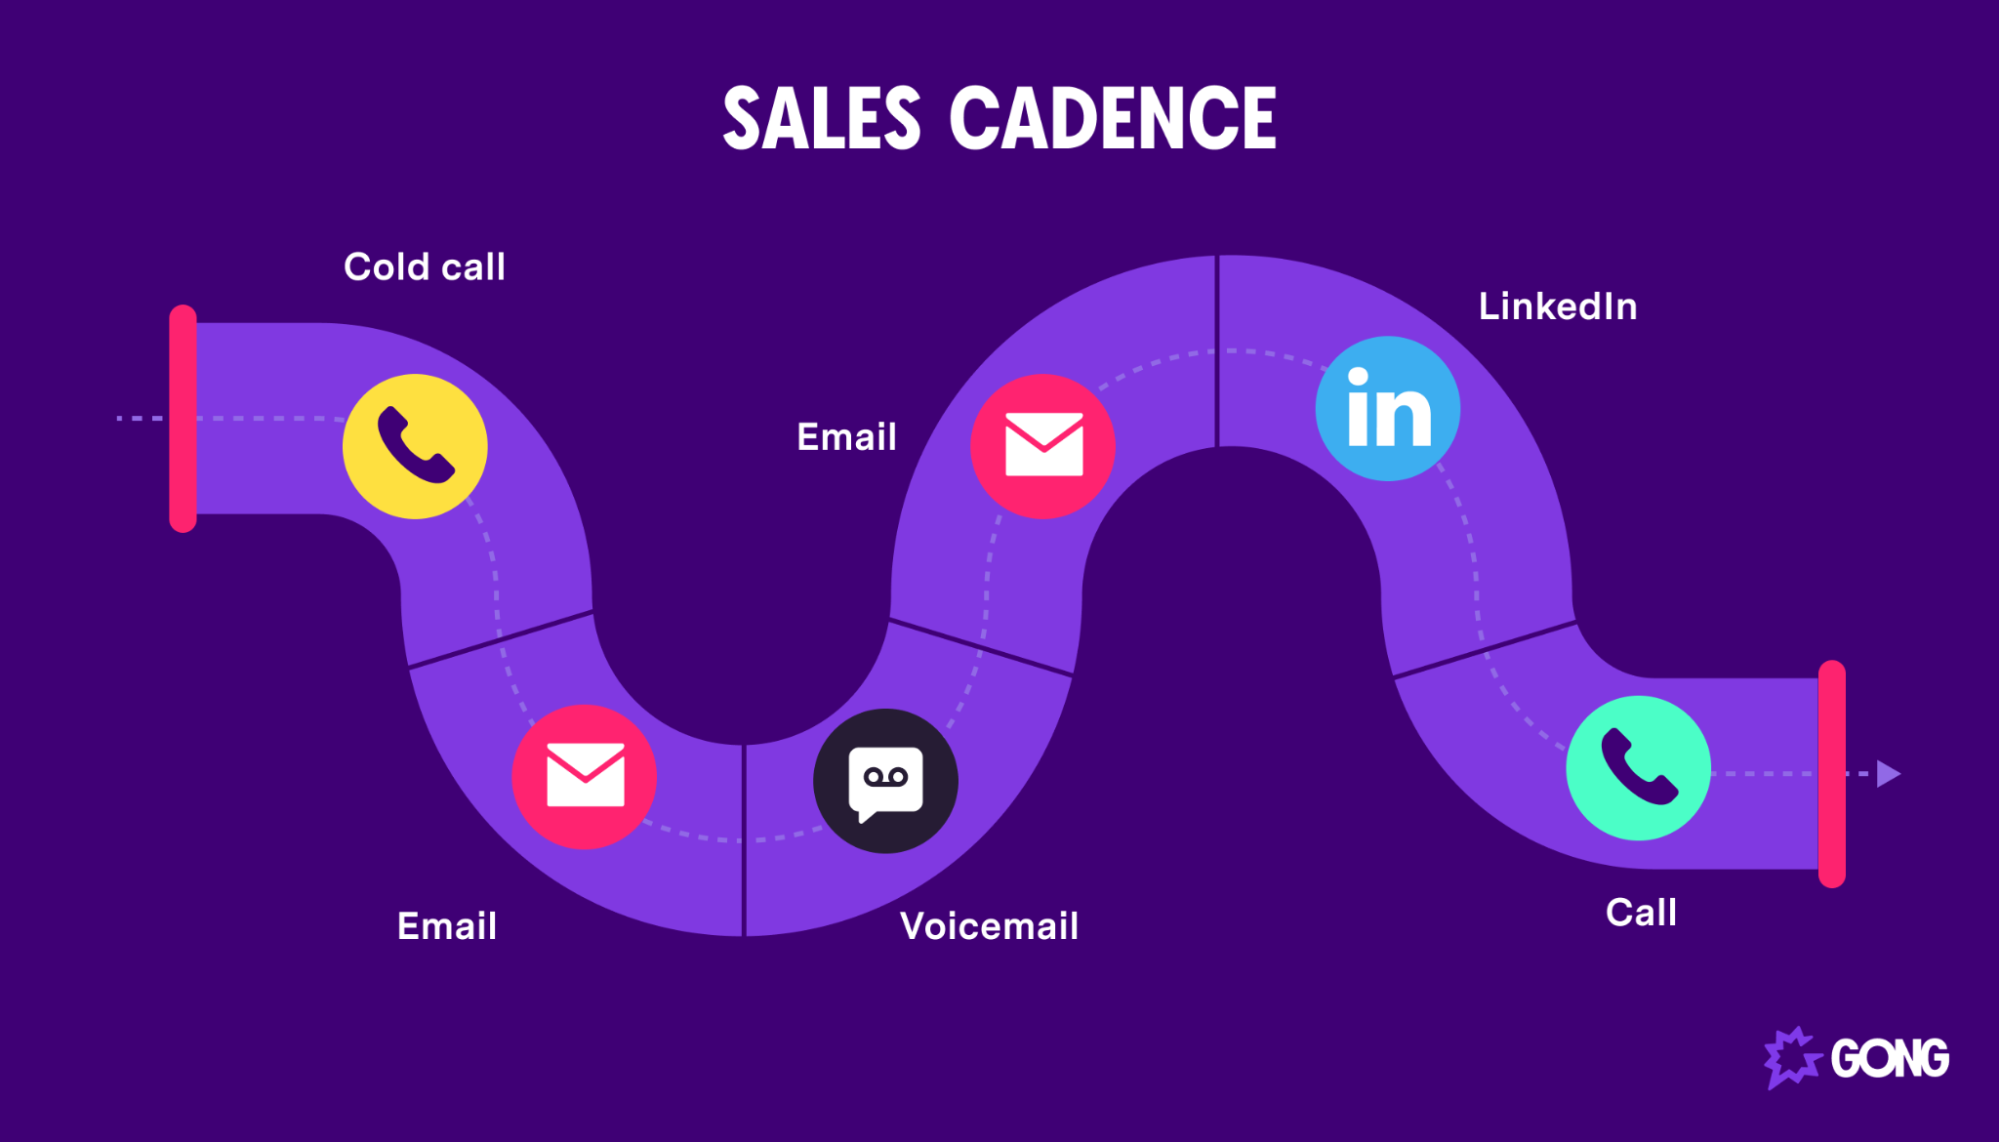 What is a sales cadence